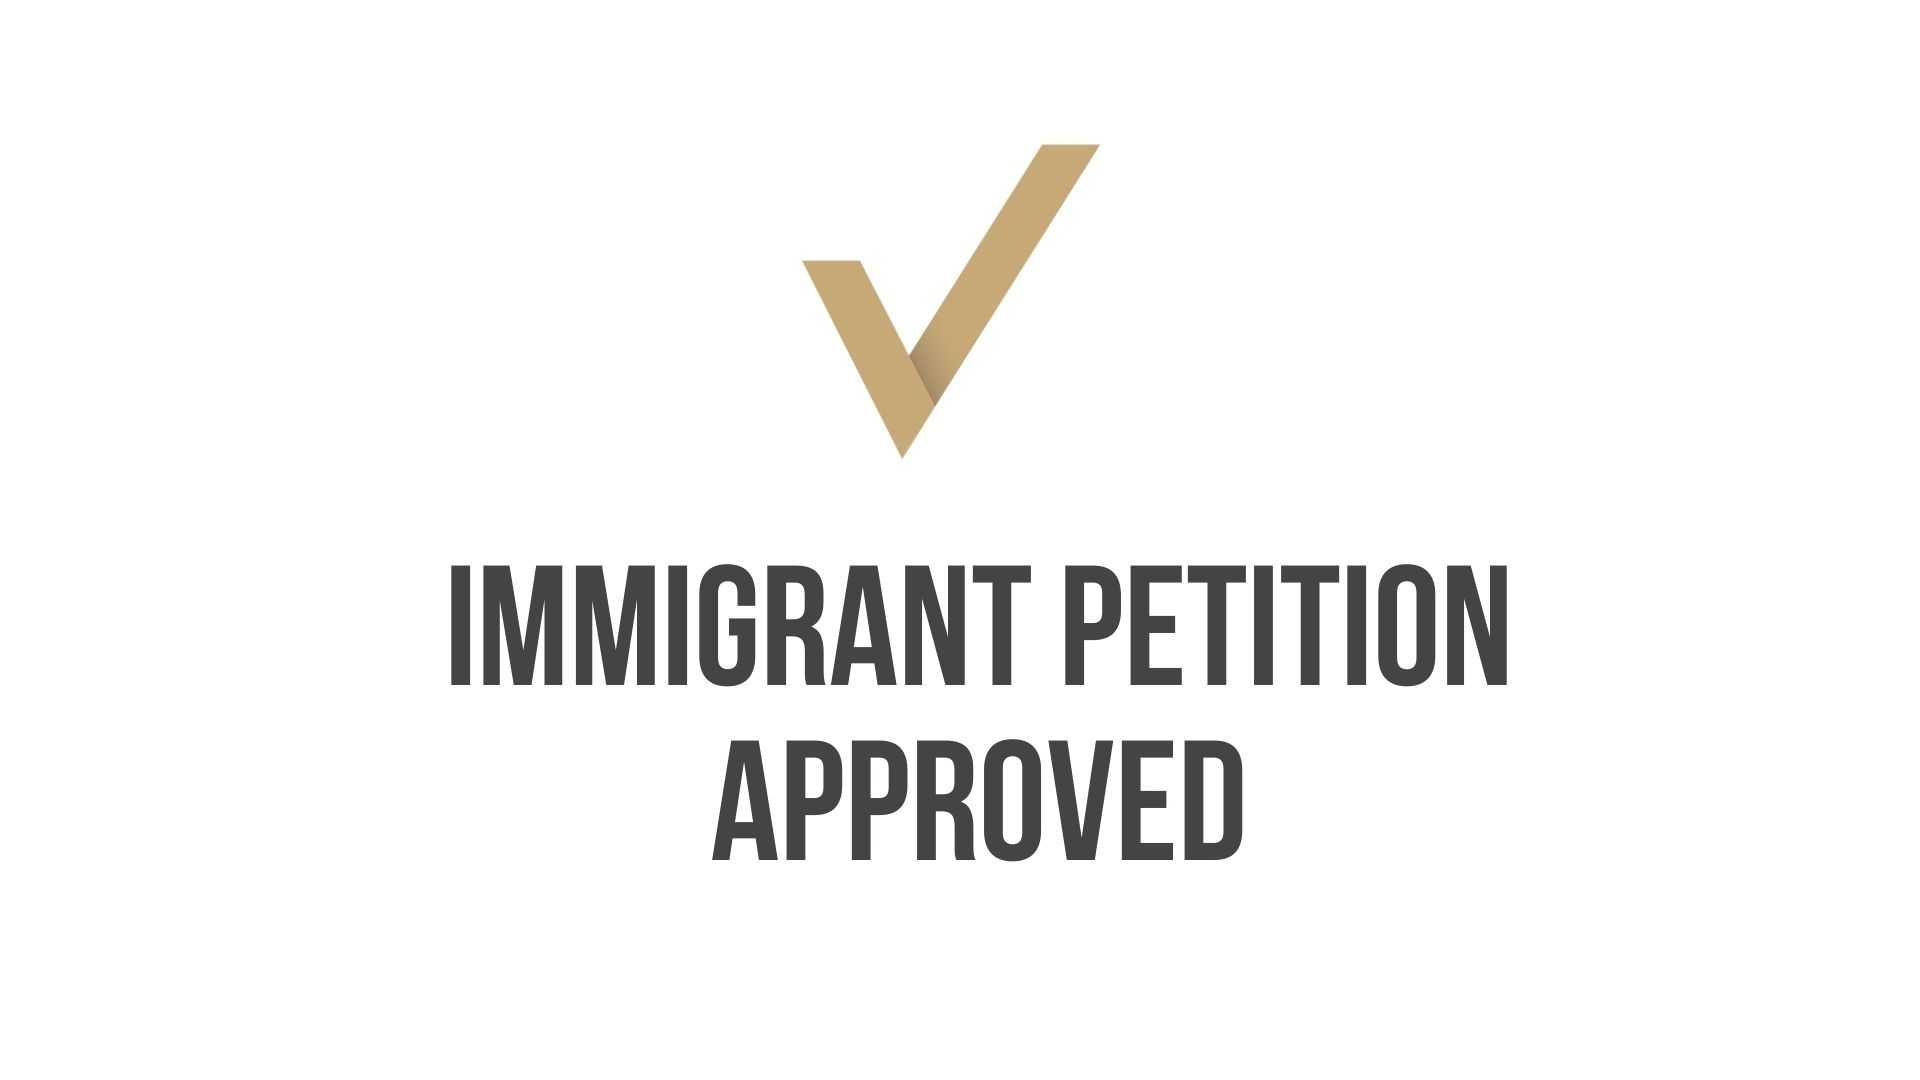 Immigrant Petition Approval